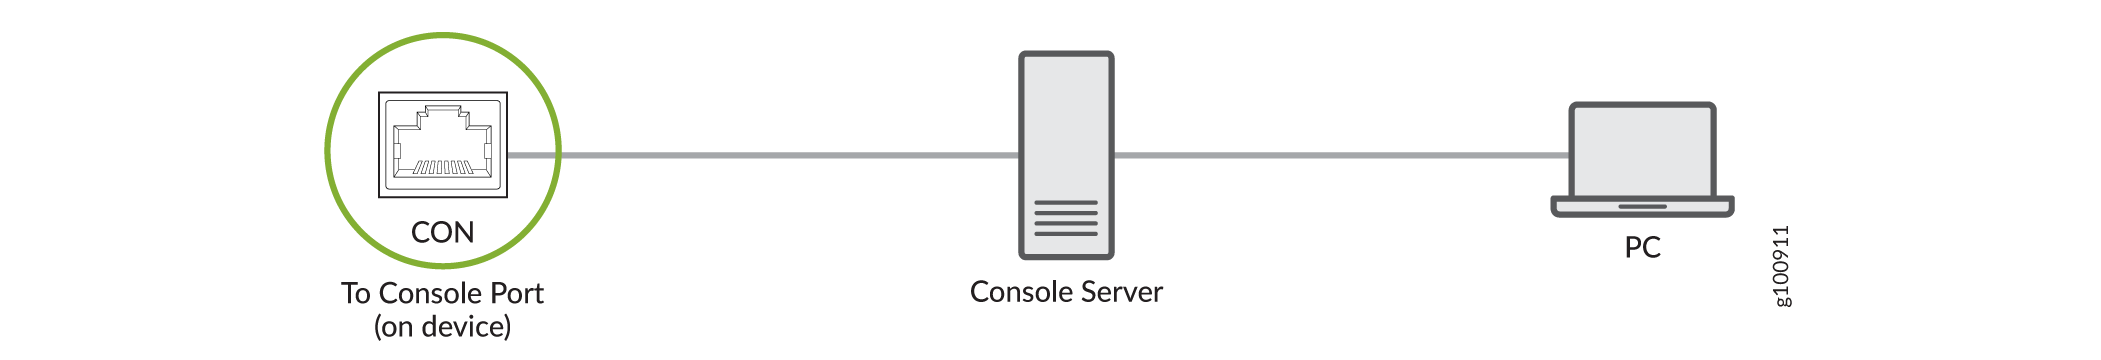 Connect the PTX10008 Router to a Management Console Through a Console Server